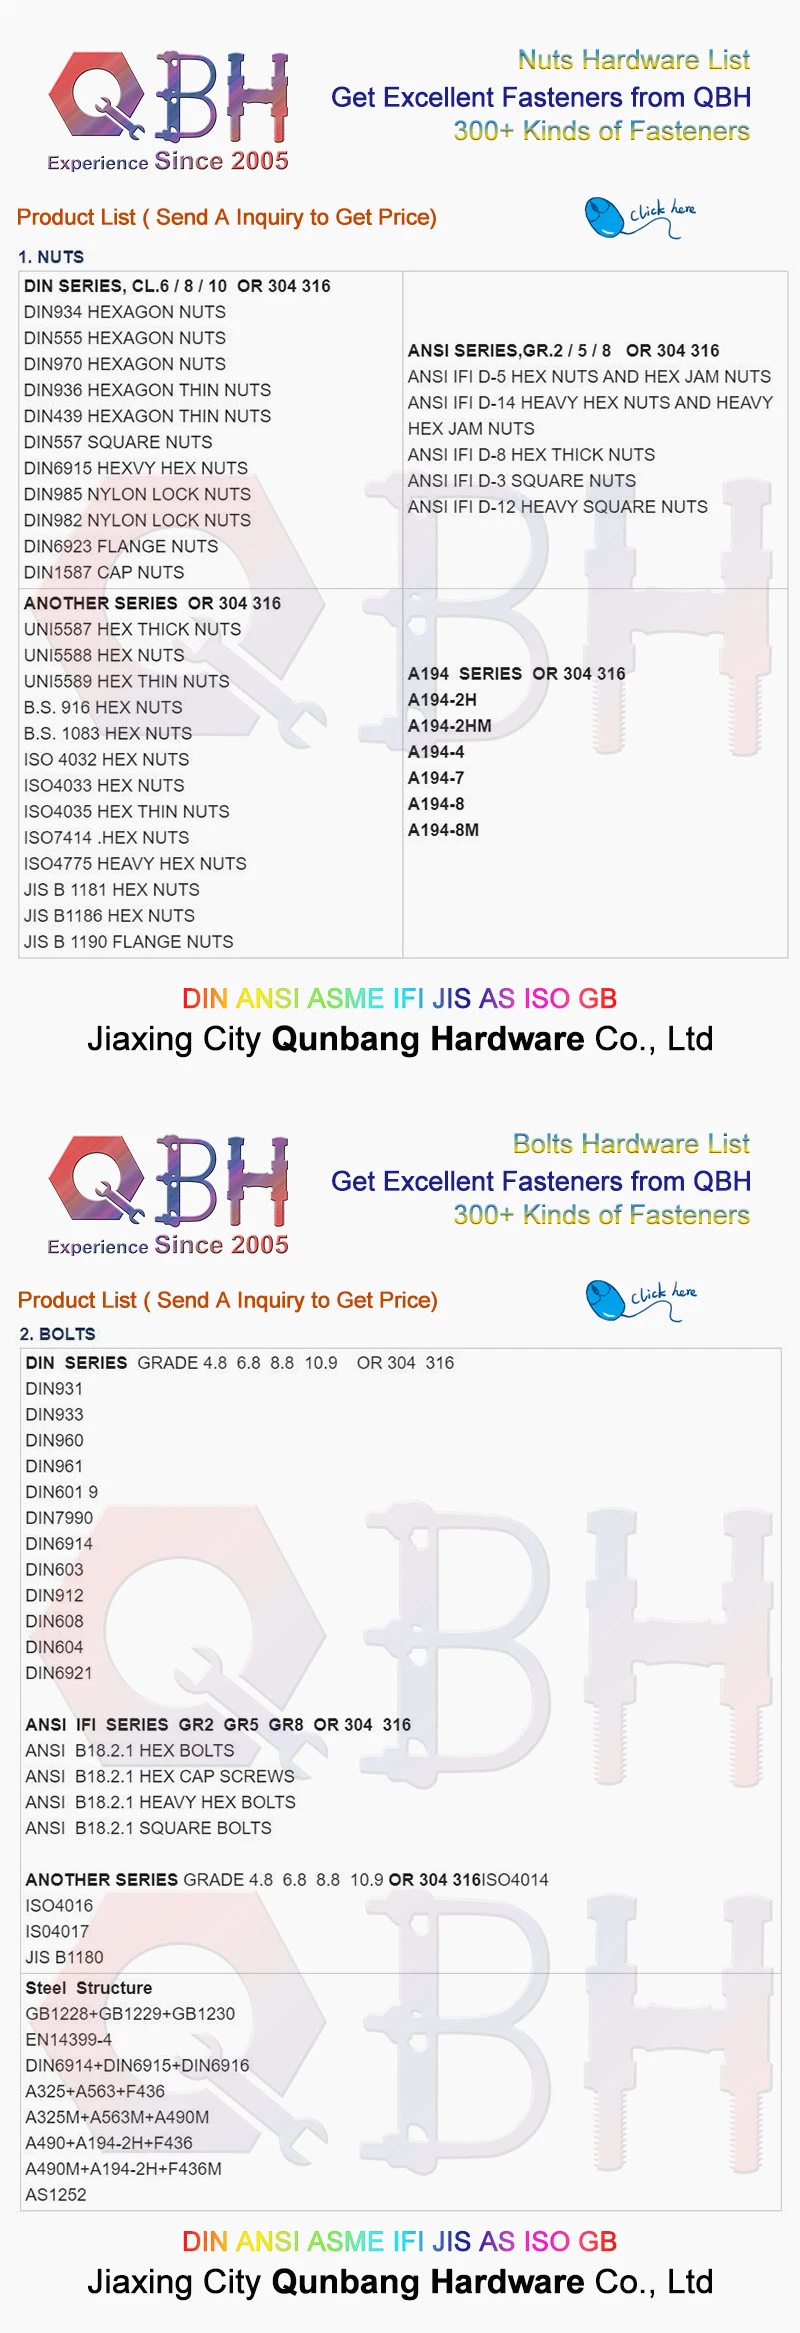 Qbh Fork Trucks Rail Cars Ocean Container Automobile Office Furniture Appliances Square Round Hole Floating Cage Welding Welded Weld Nut Forklift Spare Parts